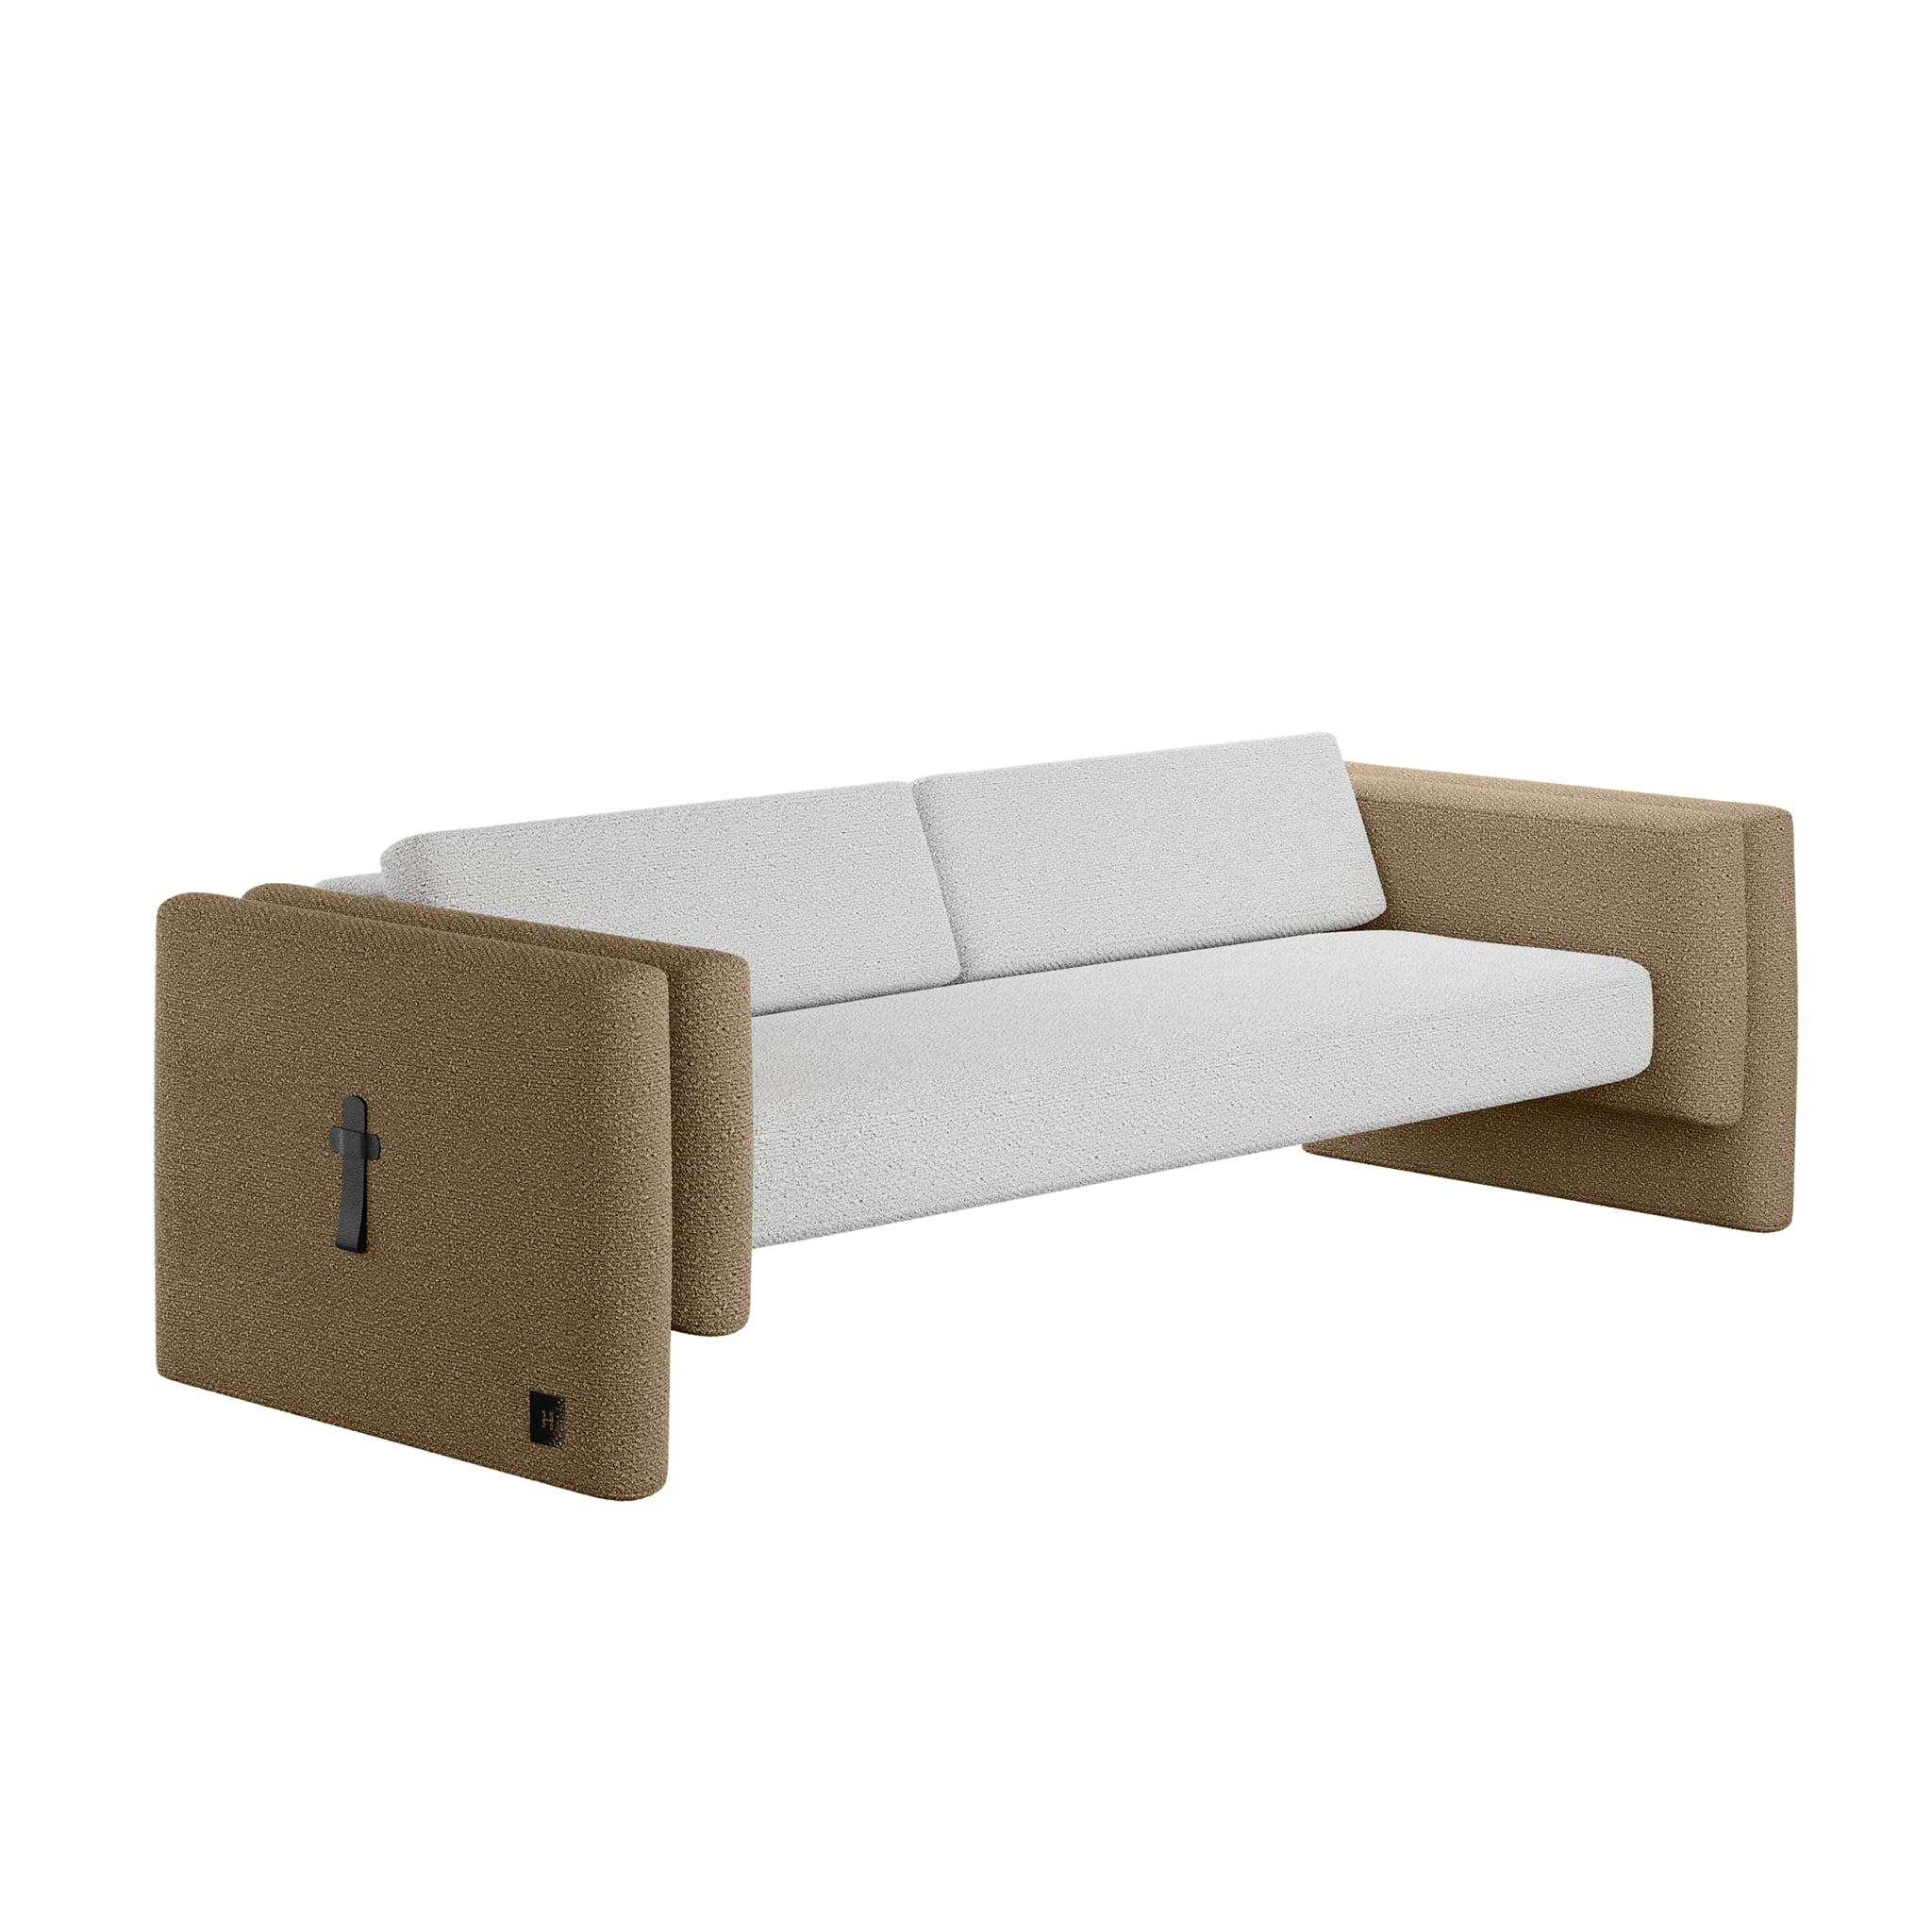 Lisola Sofa Khaki & White is a modern outdoor seating piece. A unique outdoor sofa created by the most refined design with delicate details makes it an authentic modern design piece for a contemporary outdoor area. The Lisola Sofa Khaki & White has